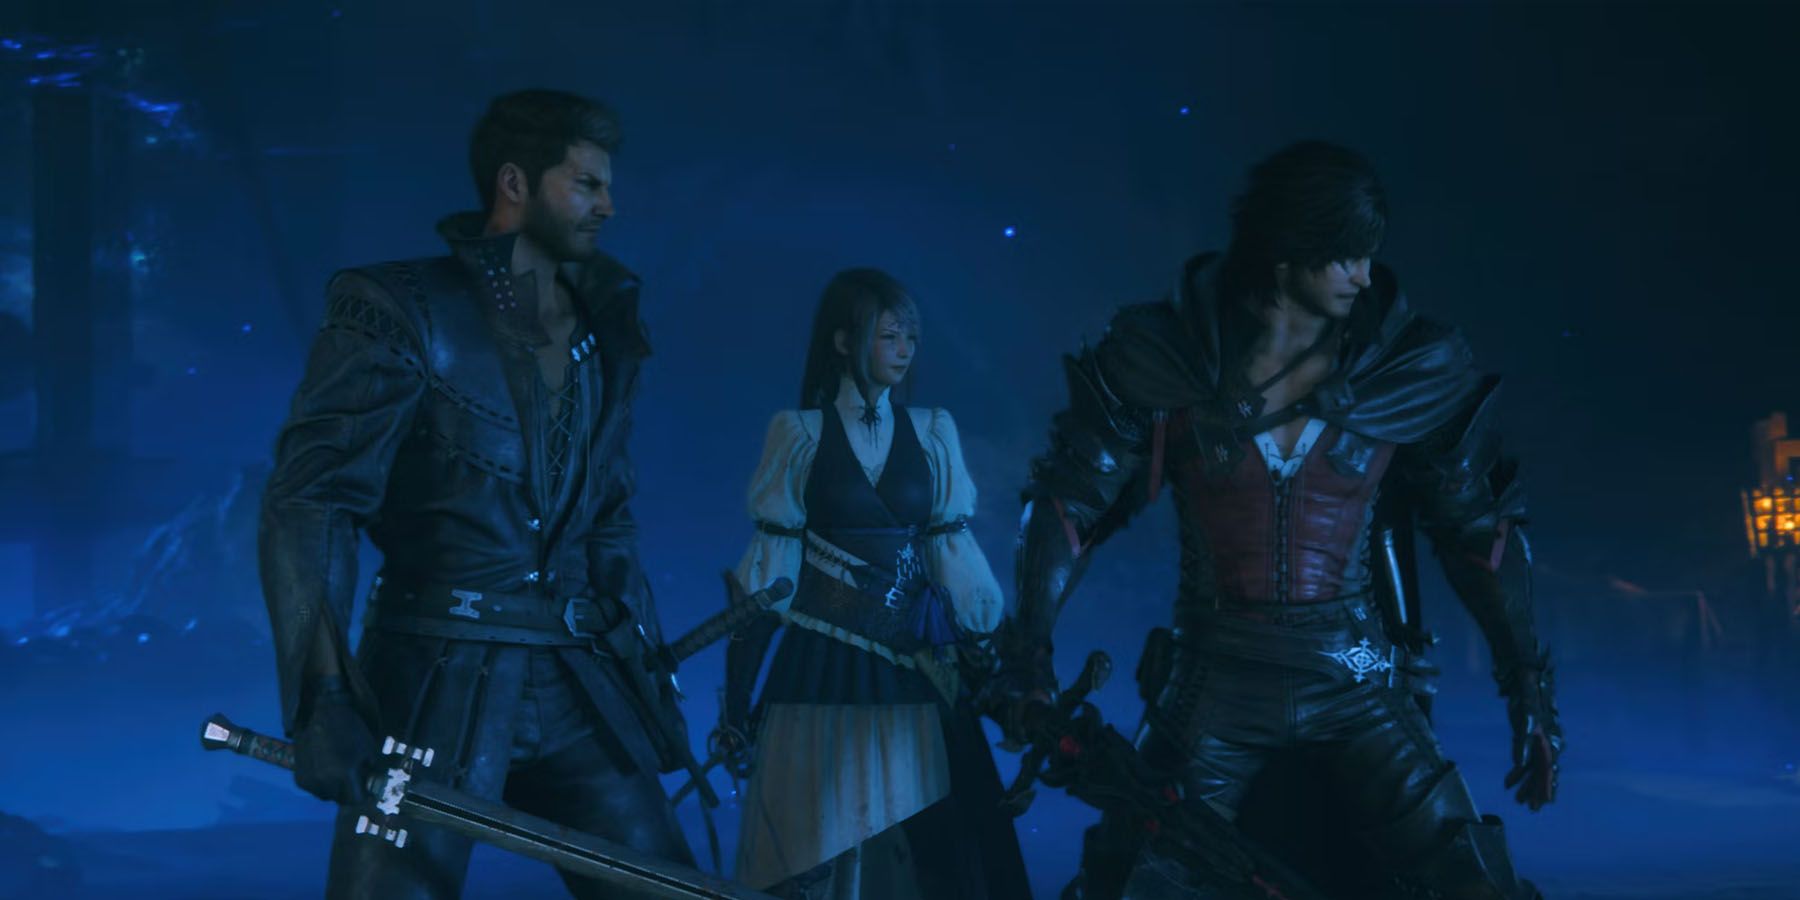 A screenshot of Clive, Jill and Cid in a dark blue chamber in Final Fantasy 16.